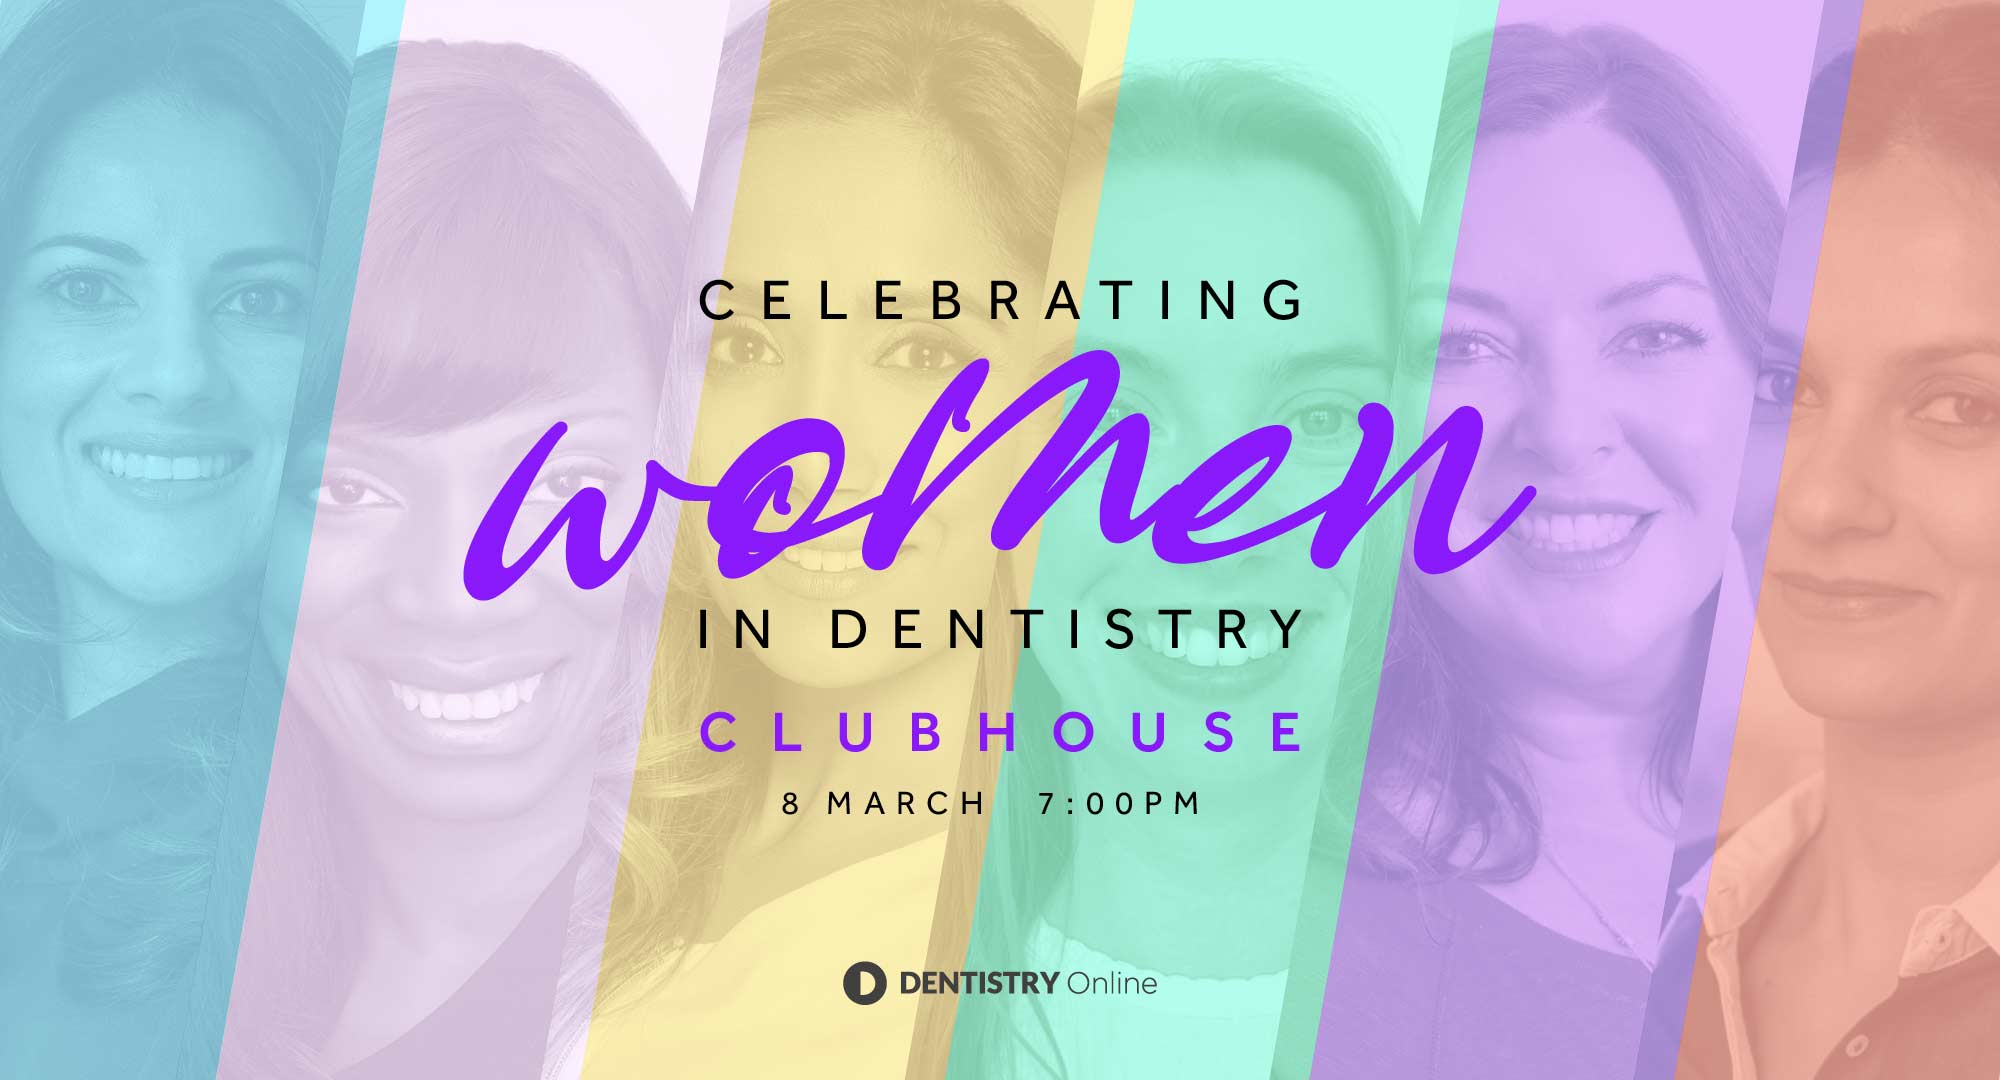 Celebrating women in dentistry – Clubhouse